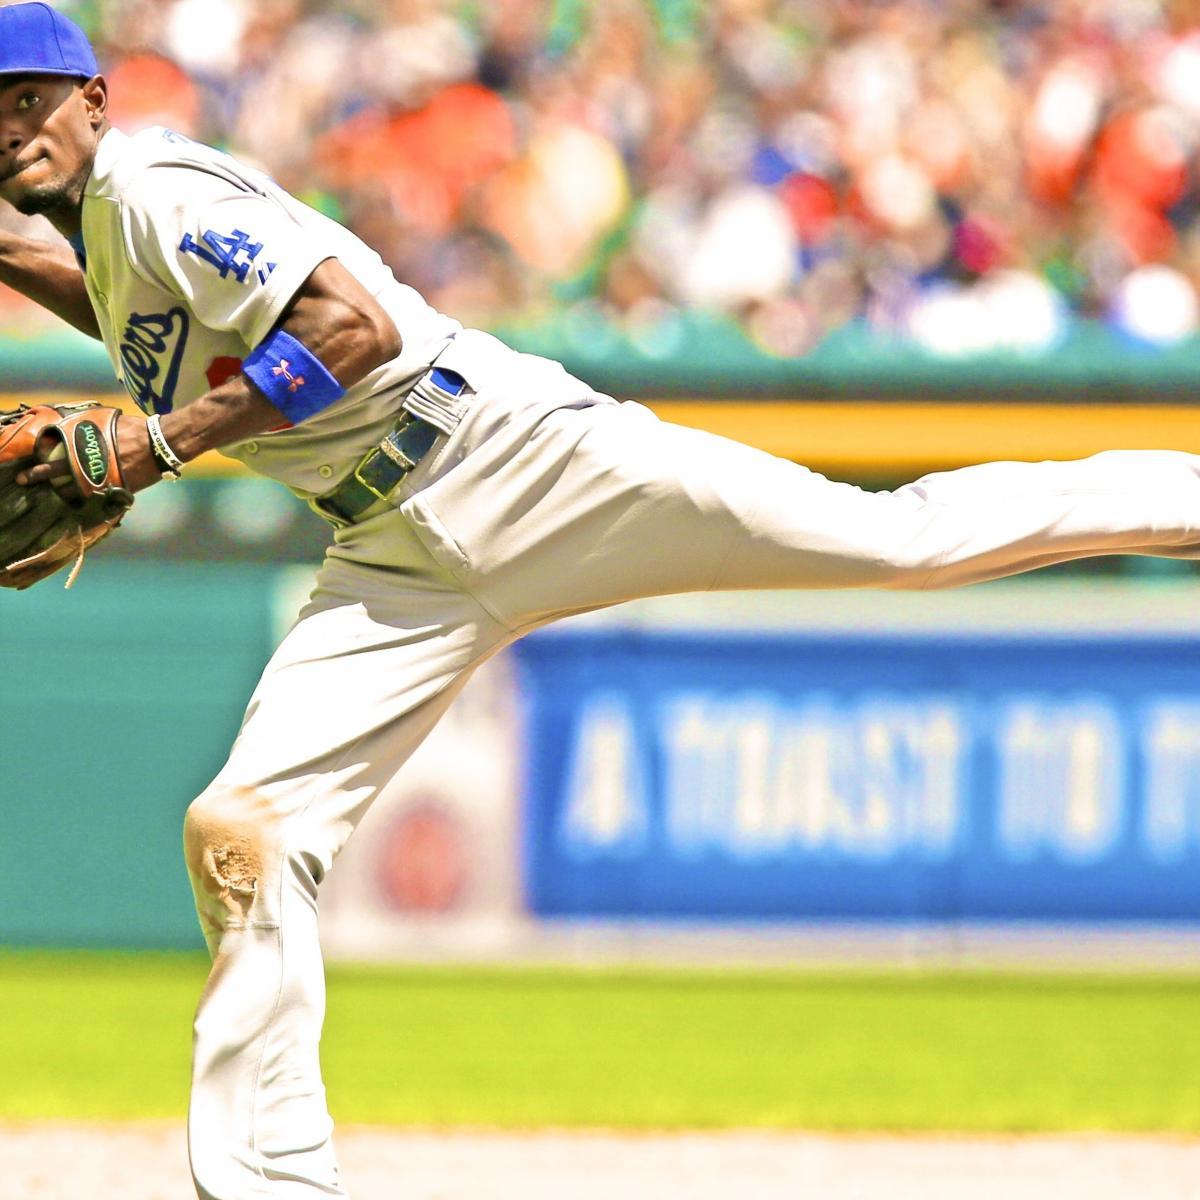 This Is How Dee Gordon Apparently Ruined His 2013 Season – Dodgers